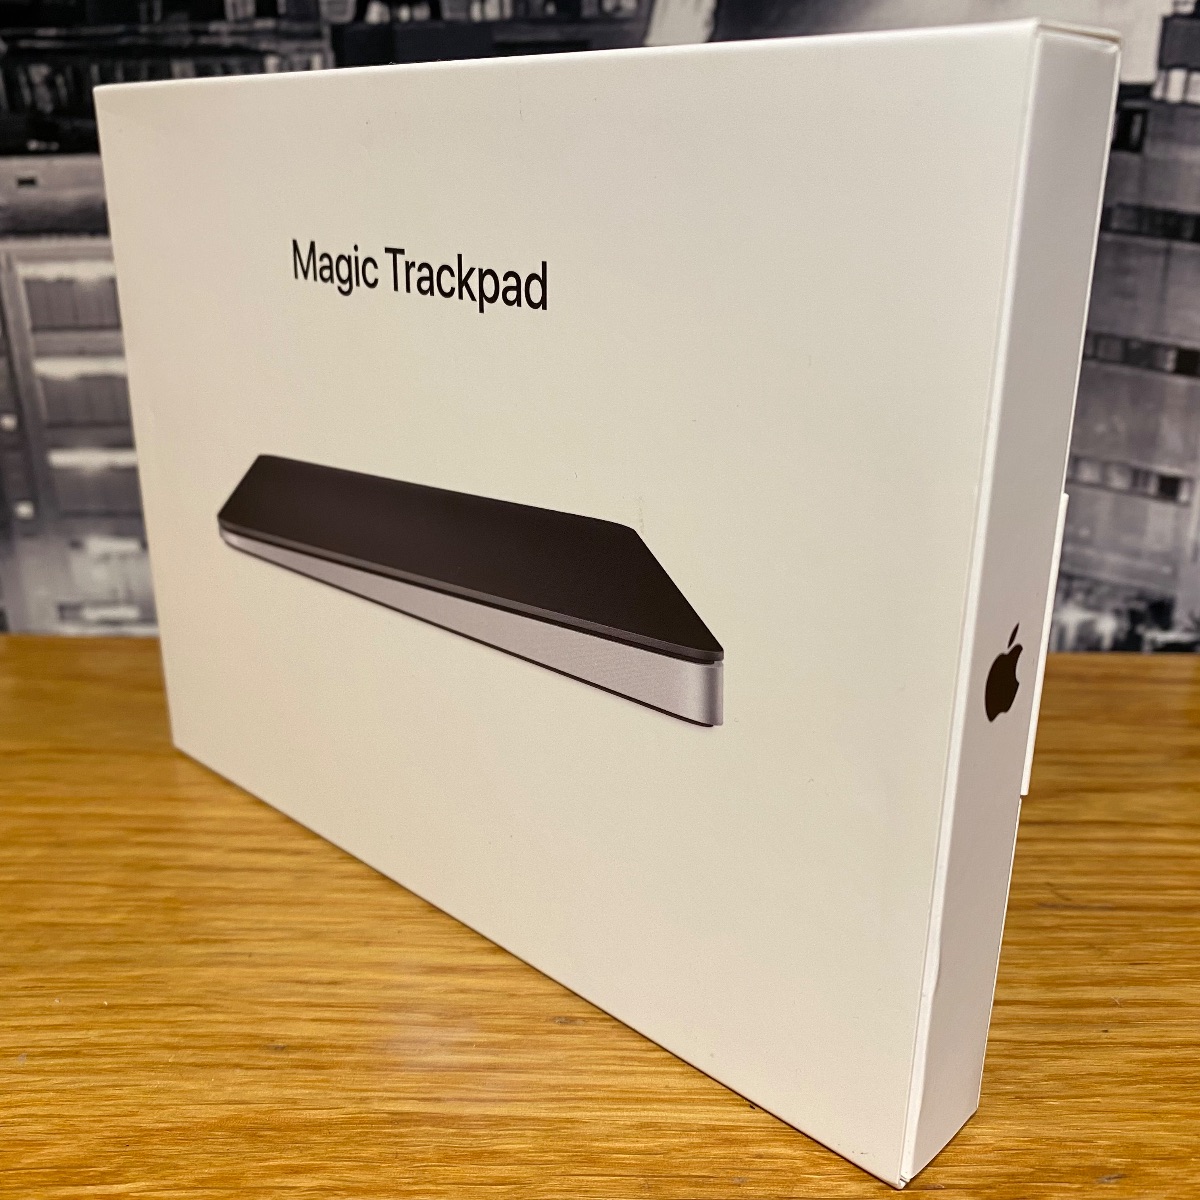 Apple Magic Trackpad Black Multi-Touch Surface Latest 2022 Model Genuine Boxed MMMP3Z/A 194252840351 (Brand New & Boxed)